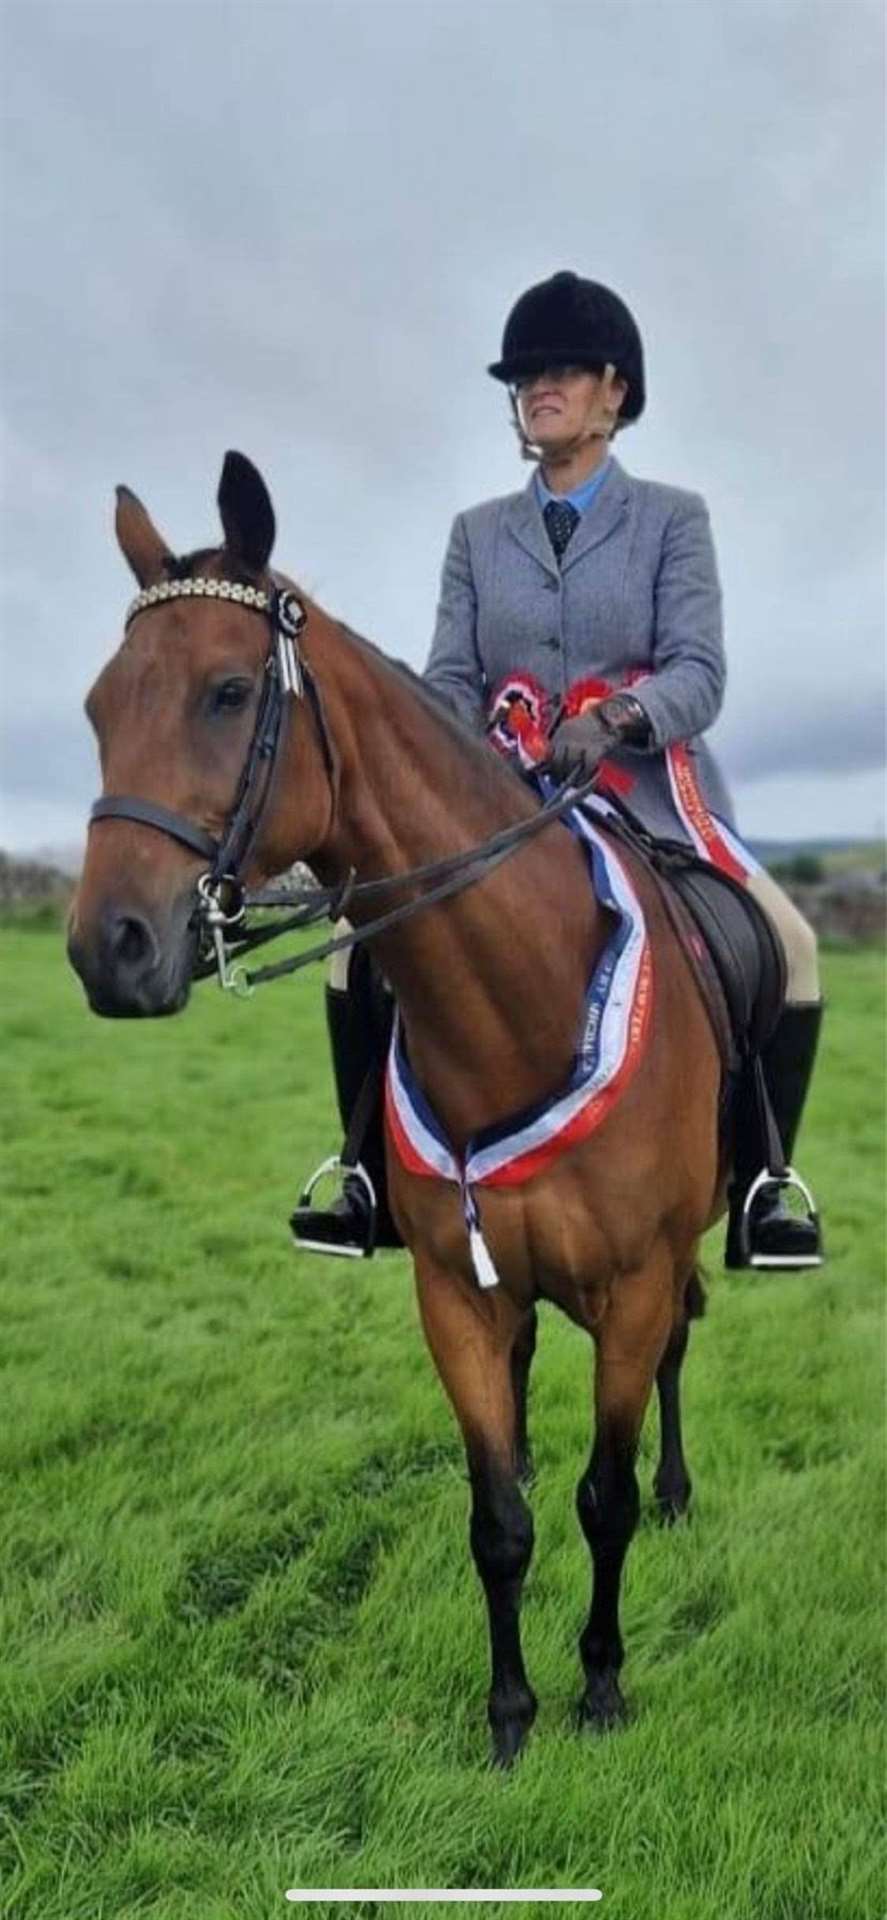 Mairi Munro, Ardgay, on her horse Southhills Elfin. Mairi won the P&J Hughes Shield in adult hand; the Shiag Game Shield in adult ridden and the Duracha Cup for overall champion.